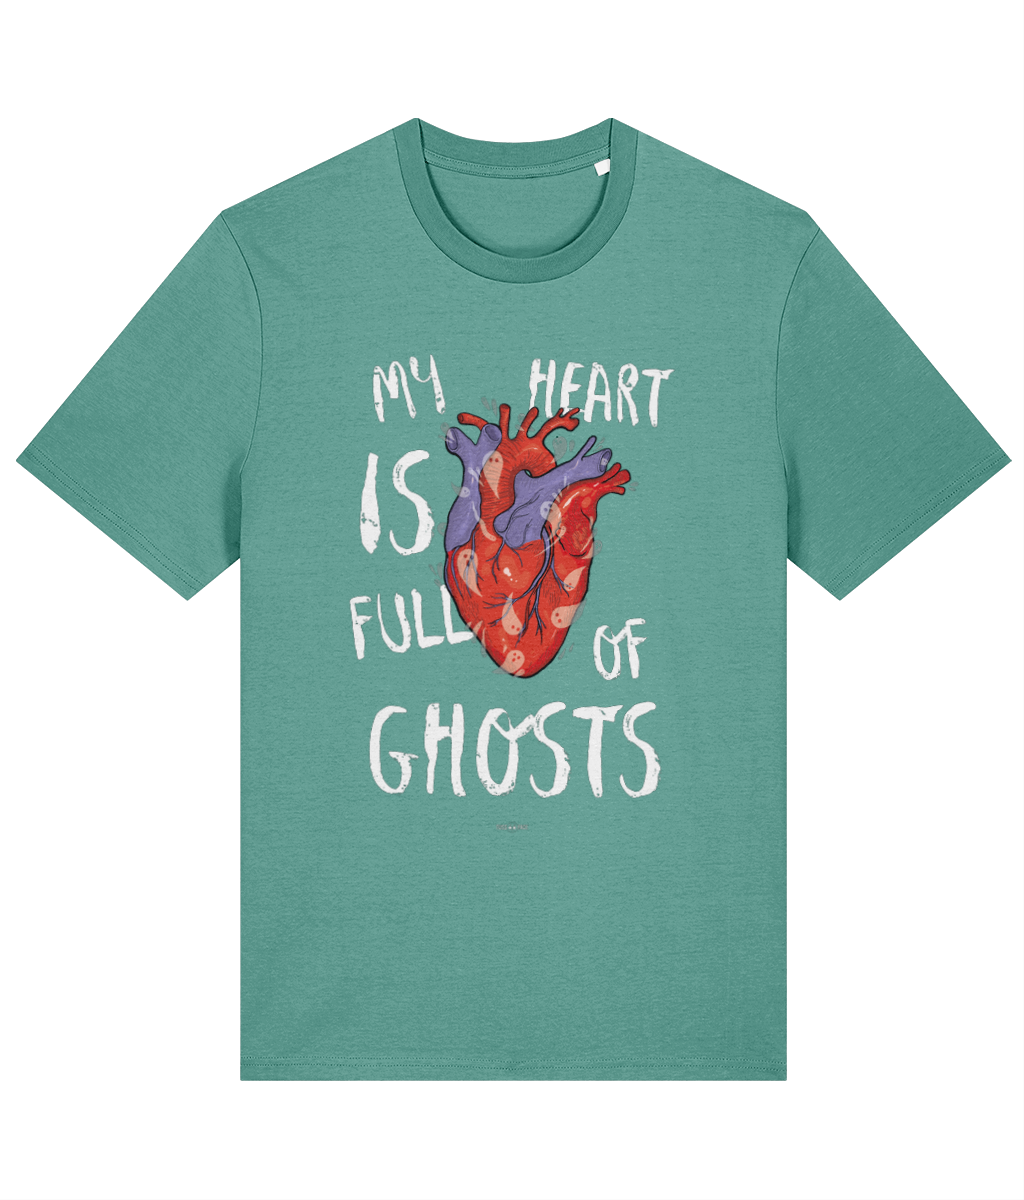 My Heart Is Full Of Ghosts - Unisex Tussface T-shirt